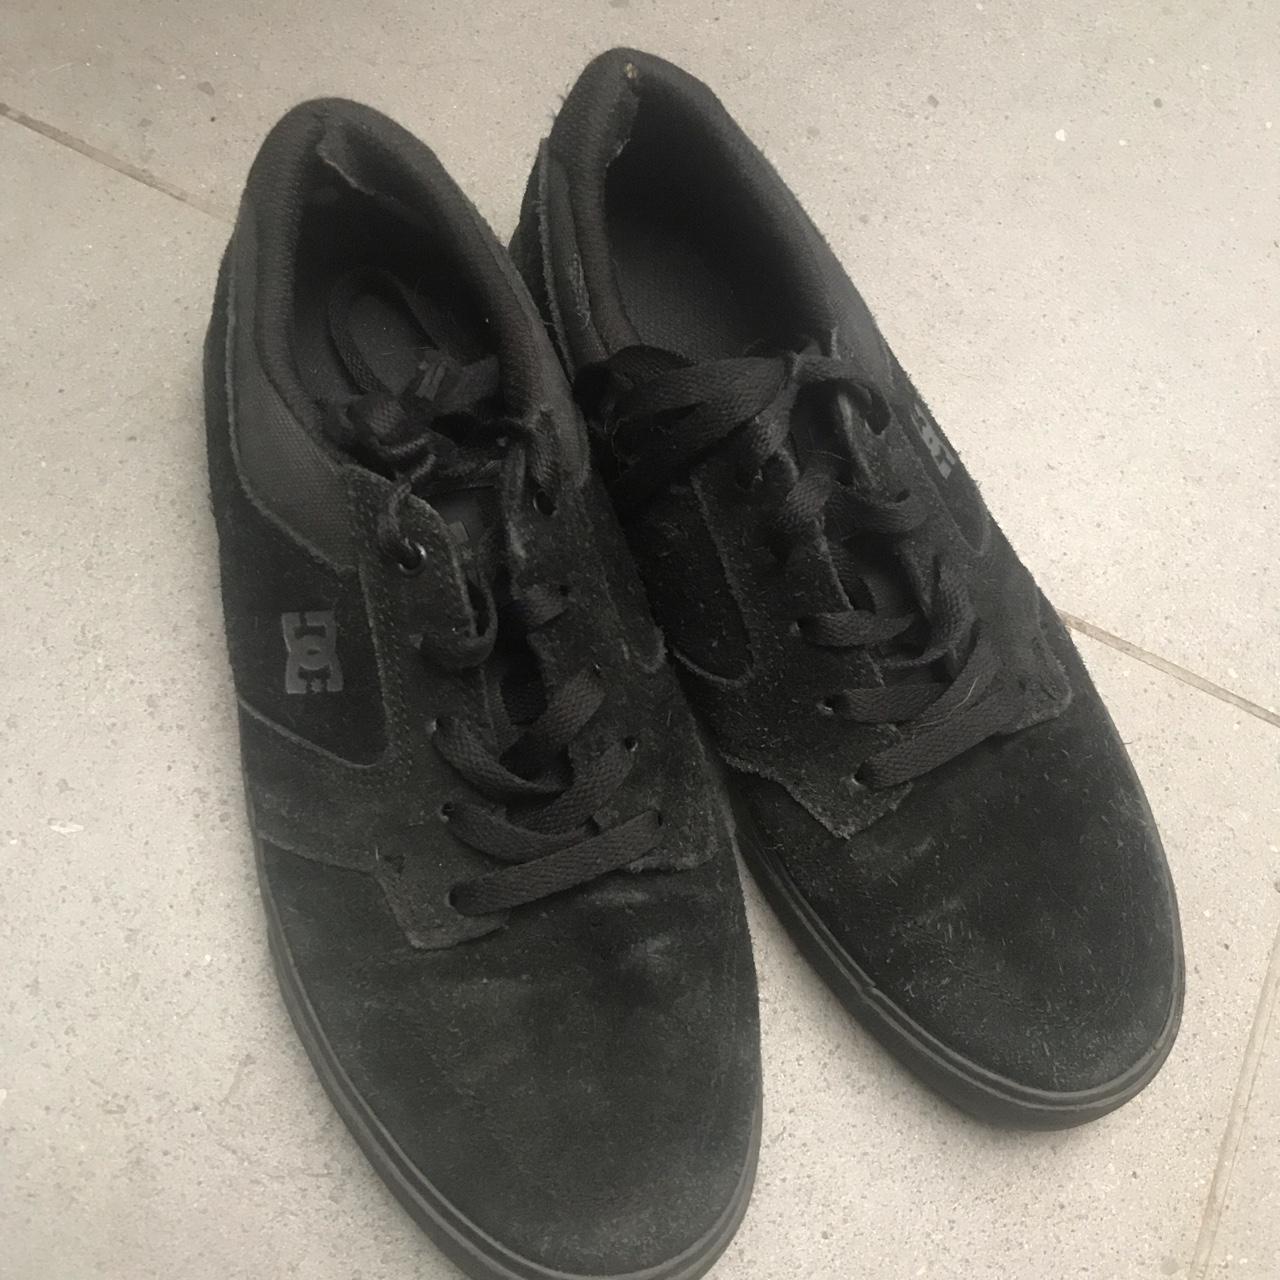 DC all black sneakers, size 6.5 but fit me and I’m a... - Depop